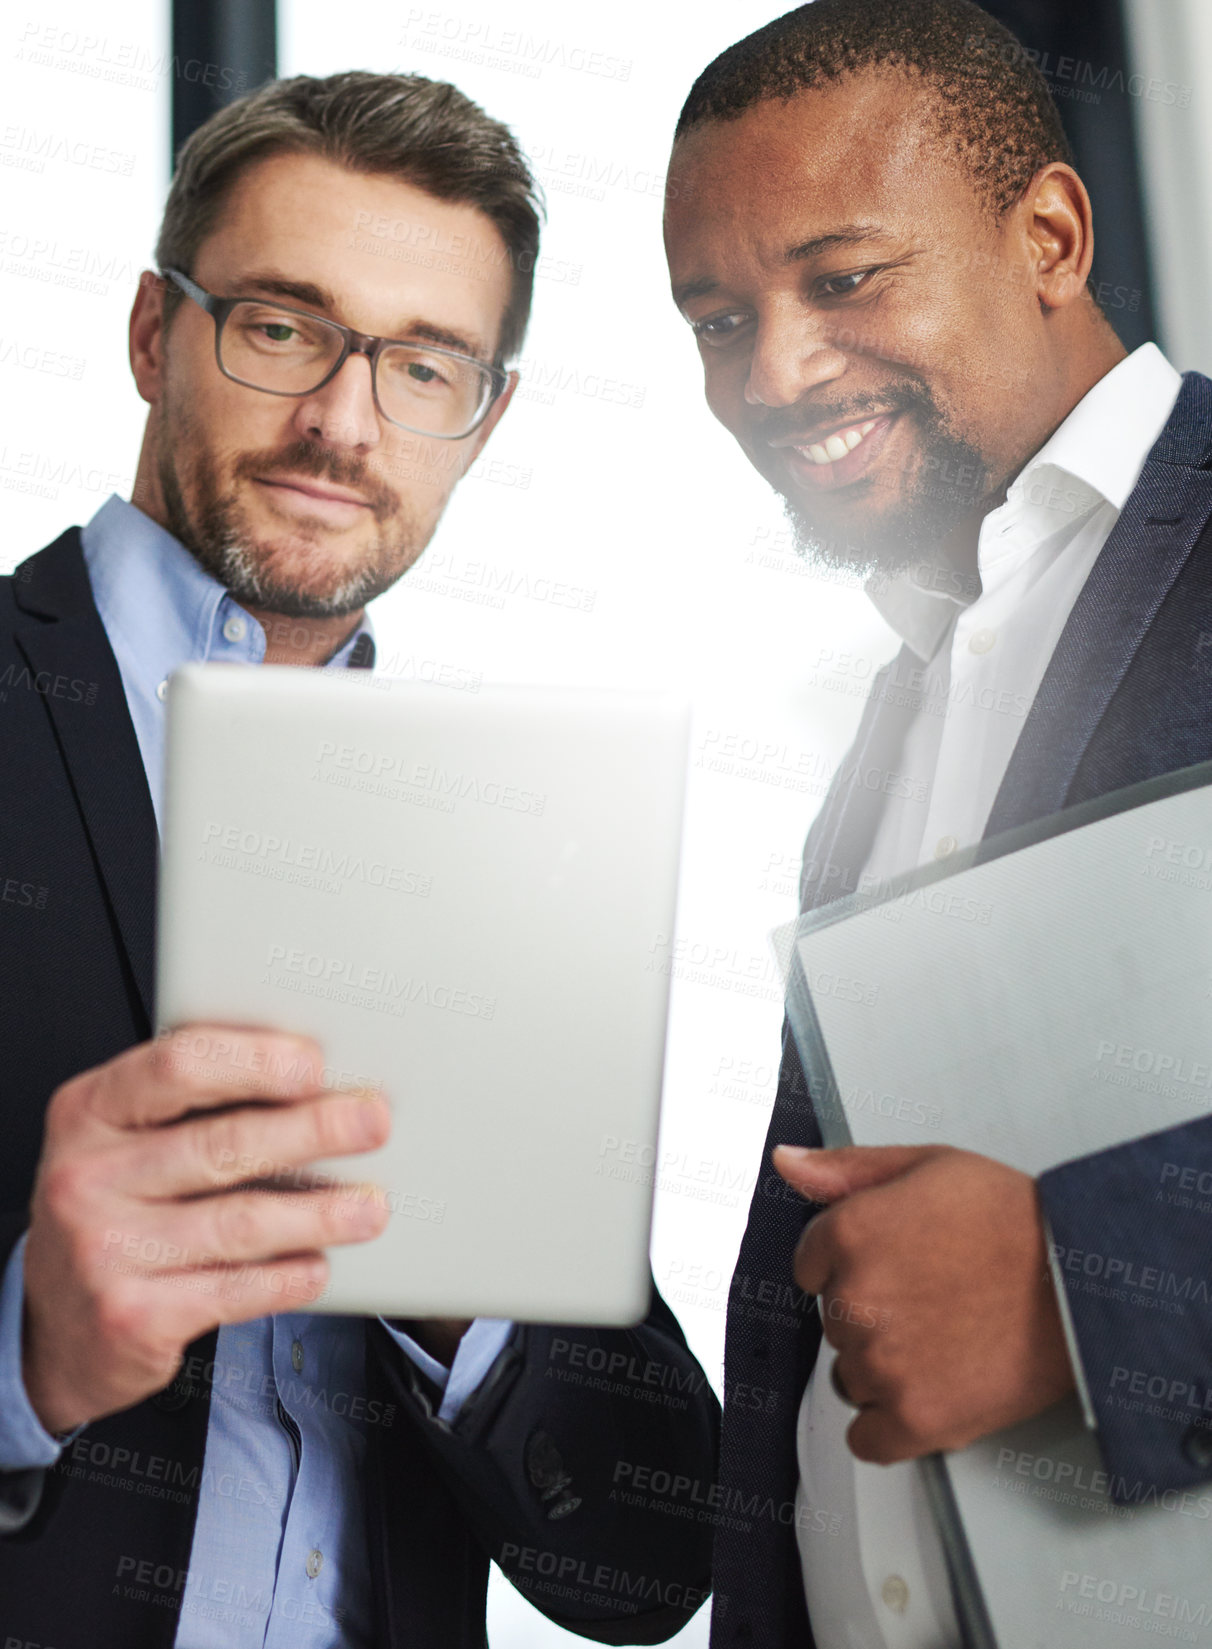 Buy stock photo Shot of two businessmen using a digital tablet together at work